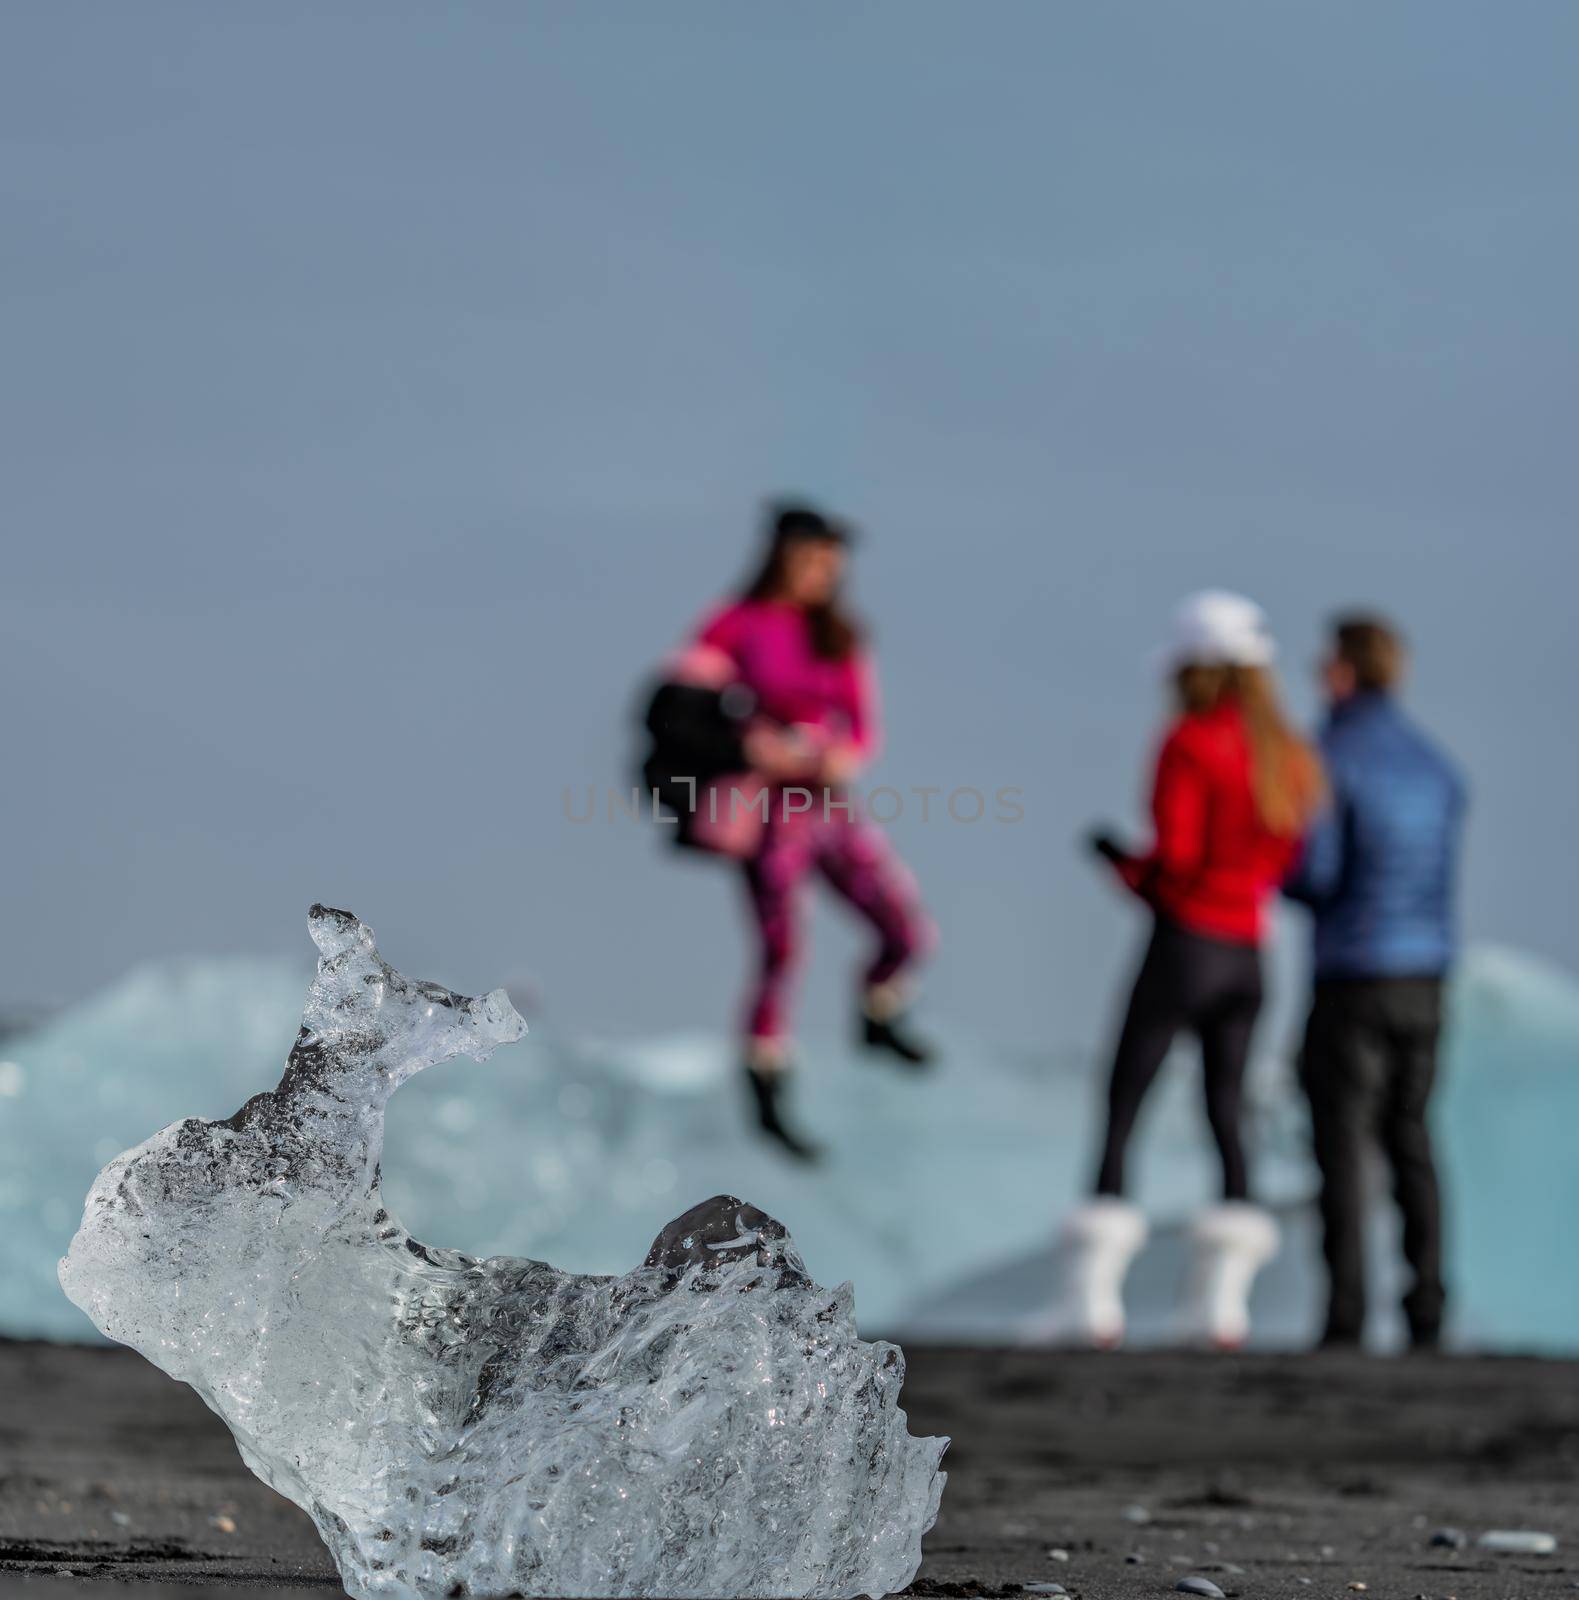 Blurred tourists in the background and iceberg in focus by FerradalFCG